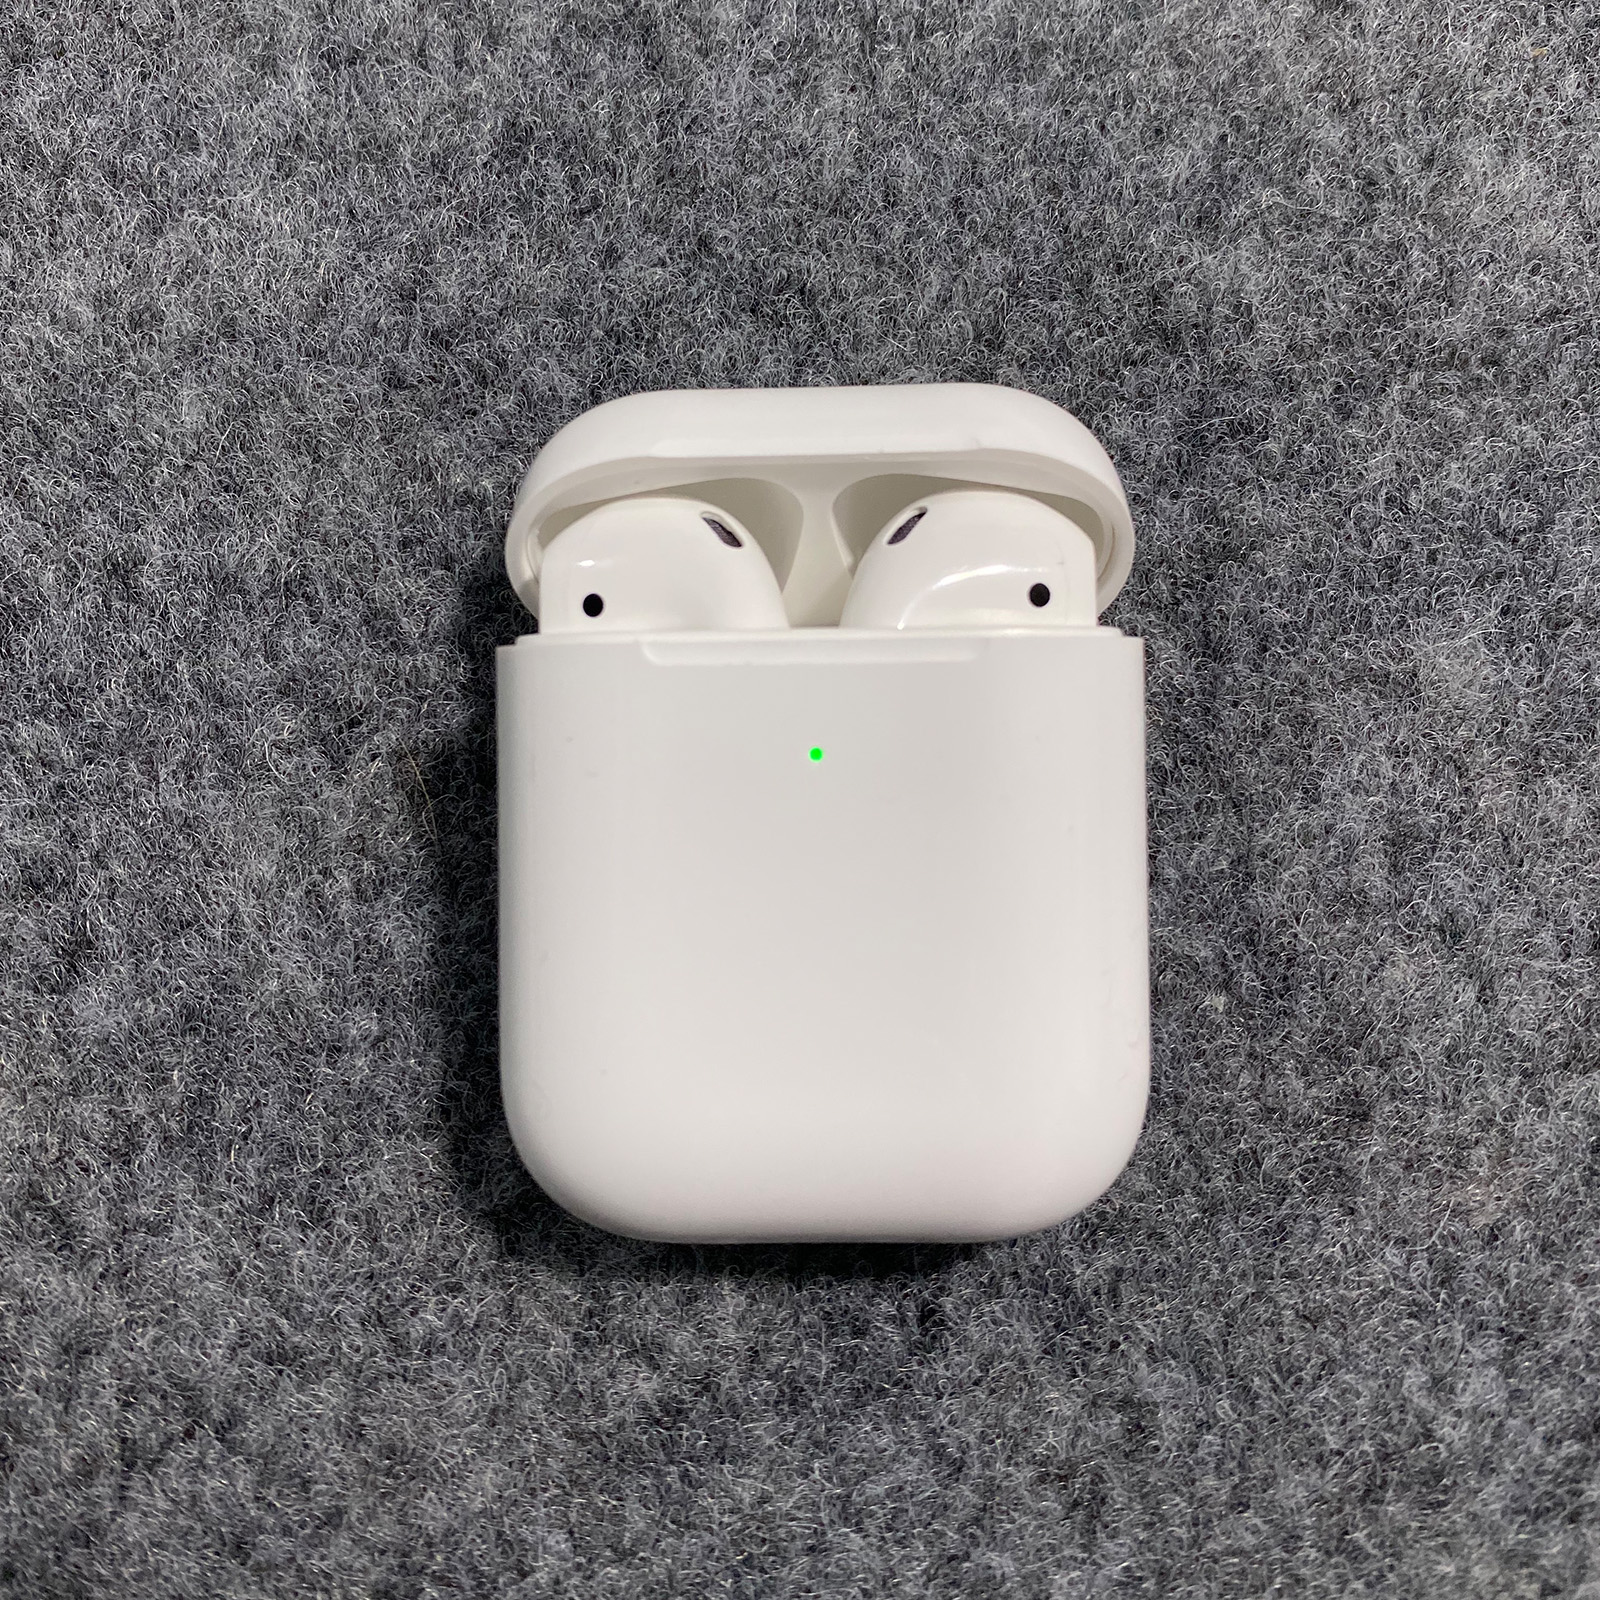 AirPods2 in mint